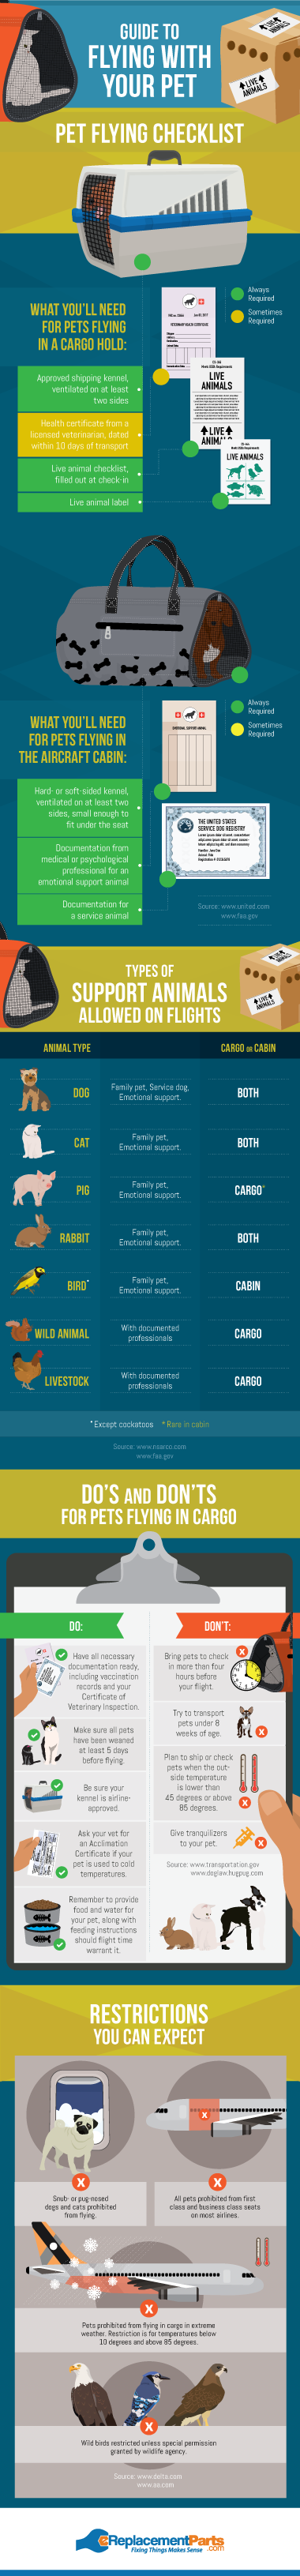 Guide to Flying with Your Pet